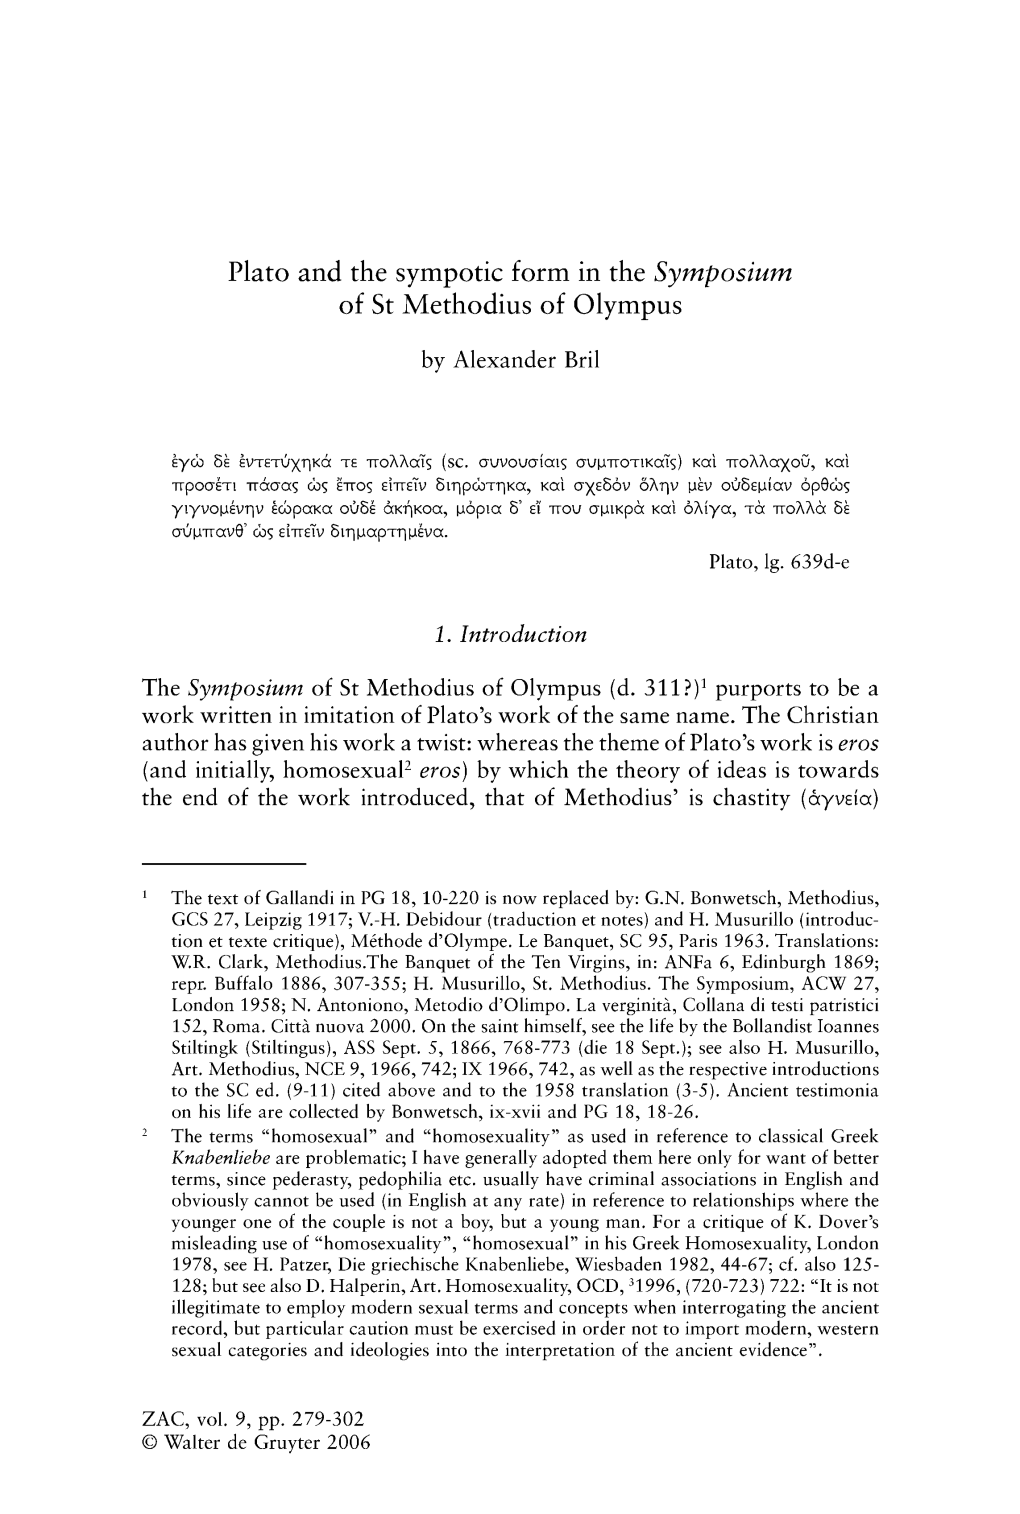 Plato and the Synipotie Form in the Symposium of St Methodius Of